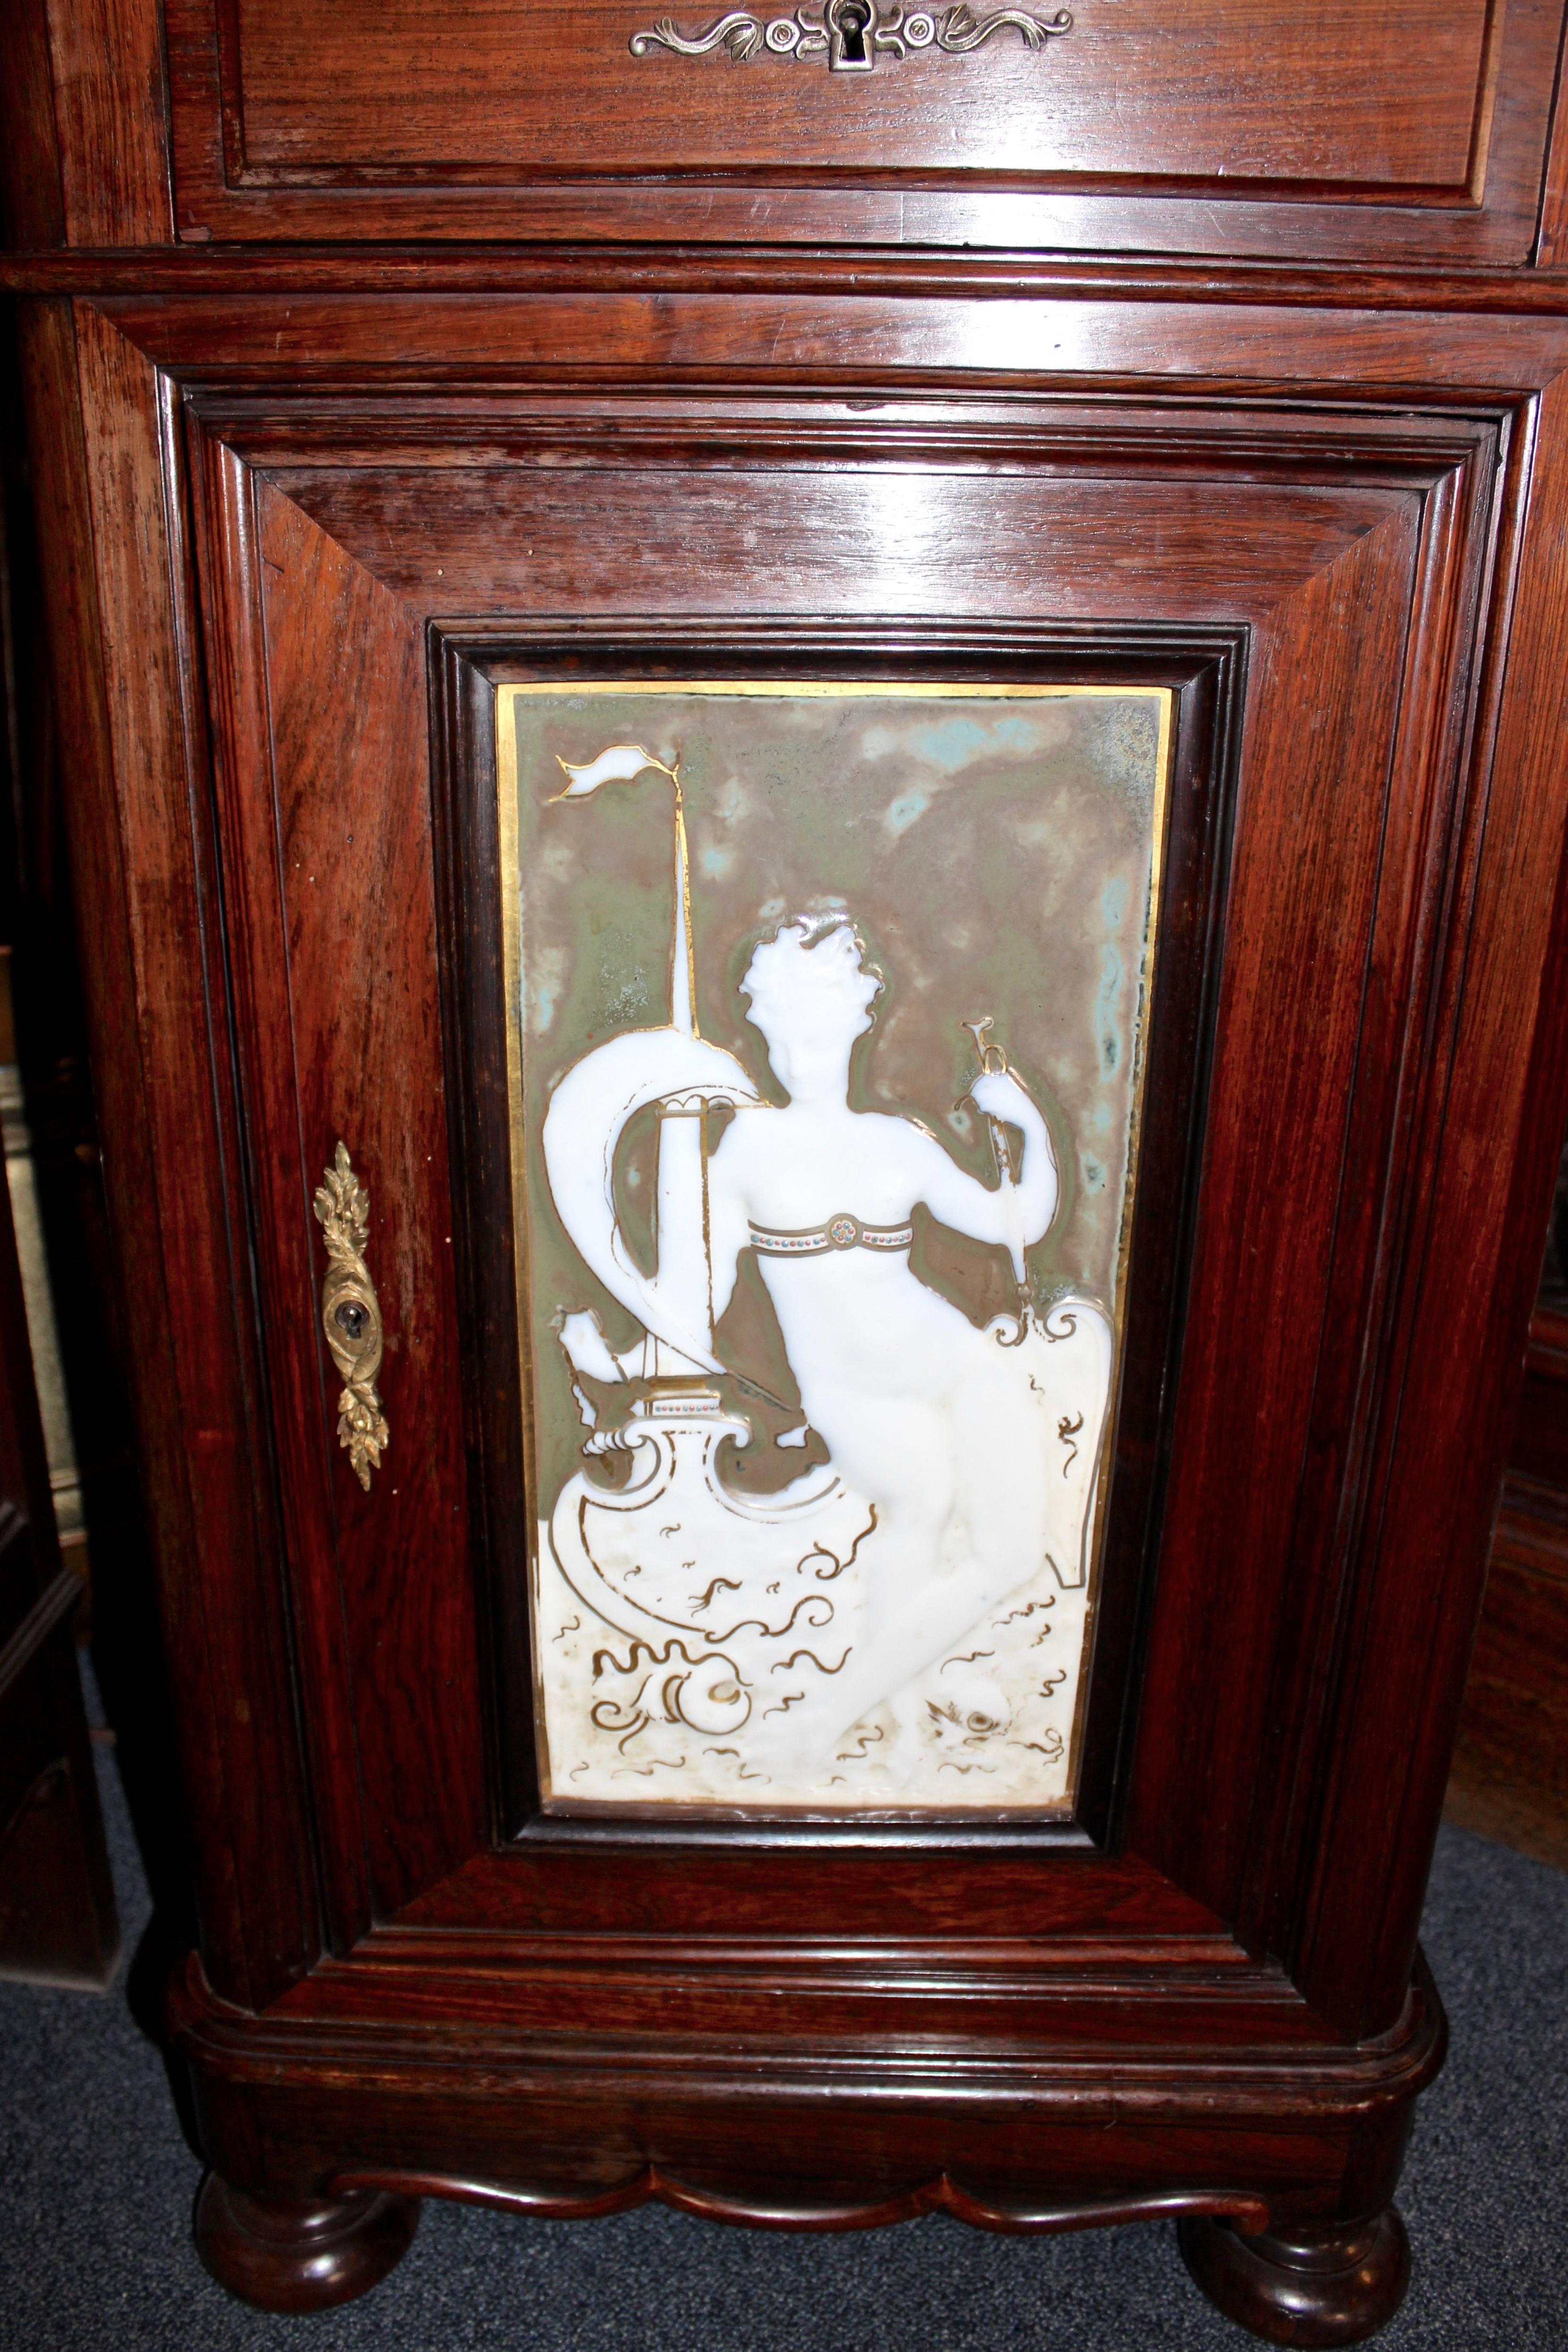 Early 20th Century Music Box in Rosewood Cabinet In Good Condition For Sale In Santa Ana, CA